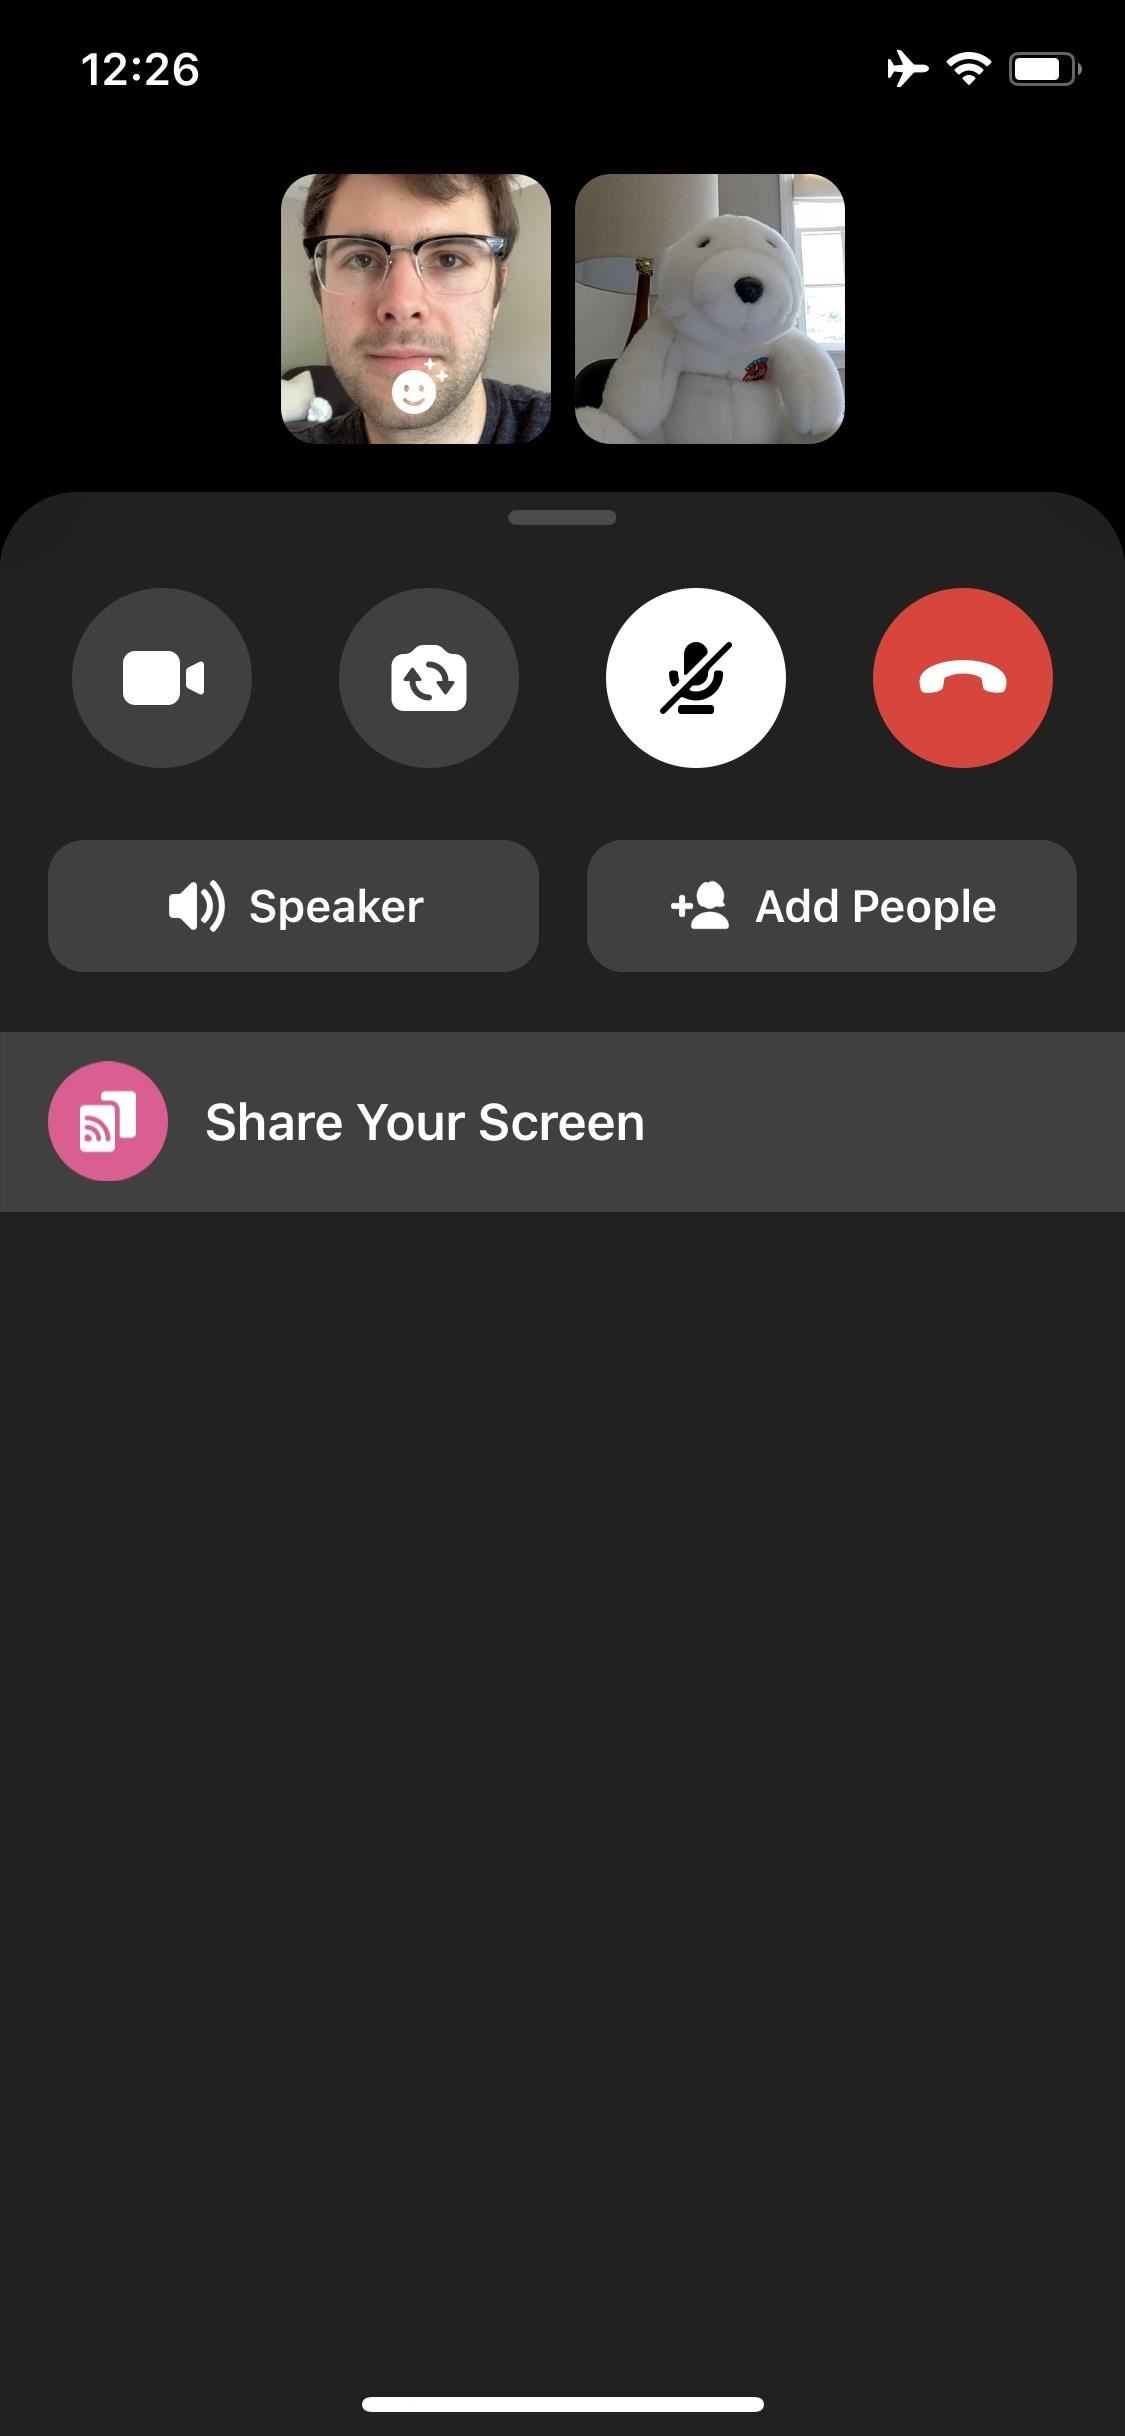 How to Share Your Phone's Screen with Friends in Facebook Messenger Video Chats